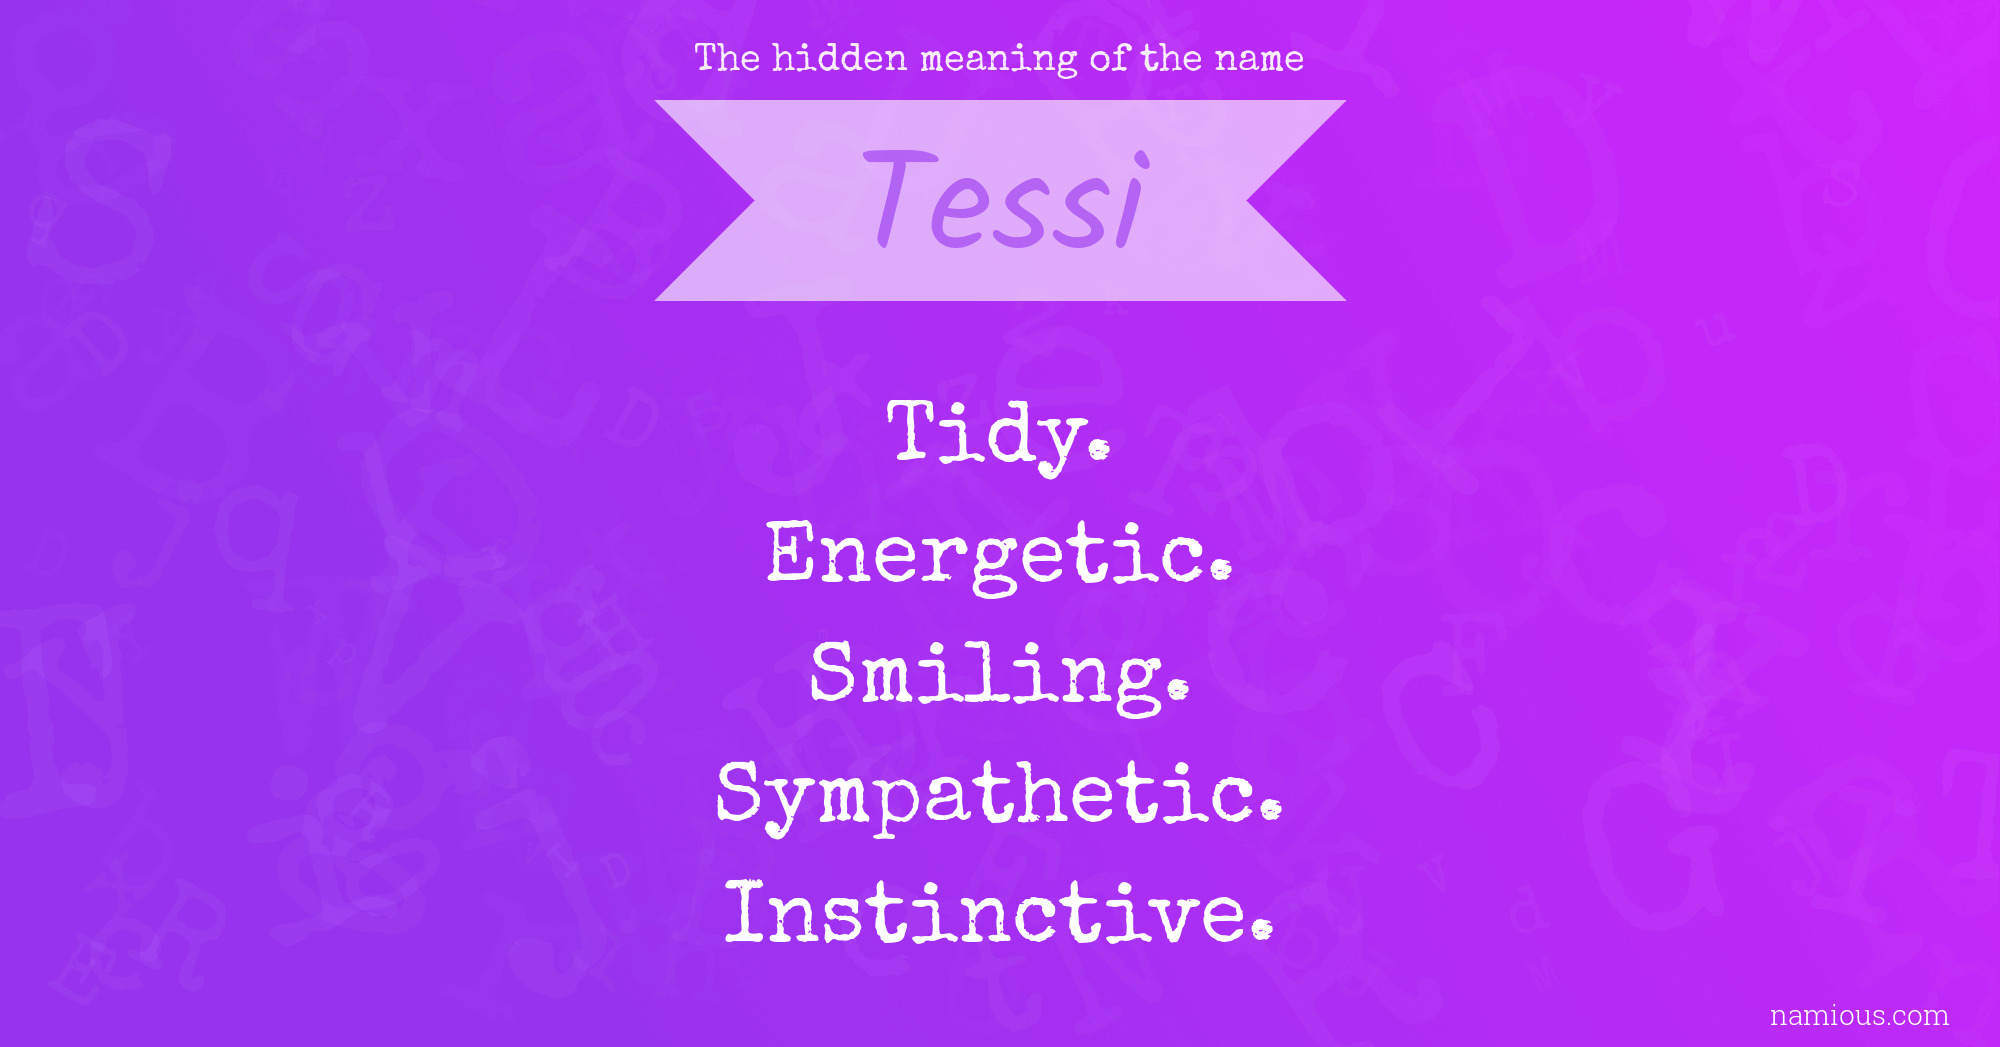 The hidden meaning of the name Tessi